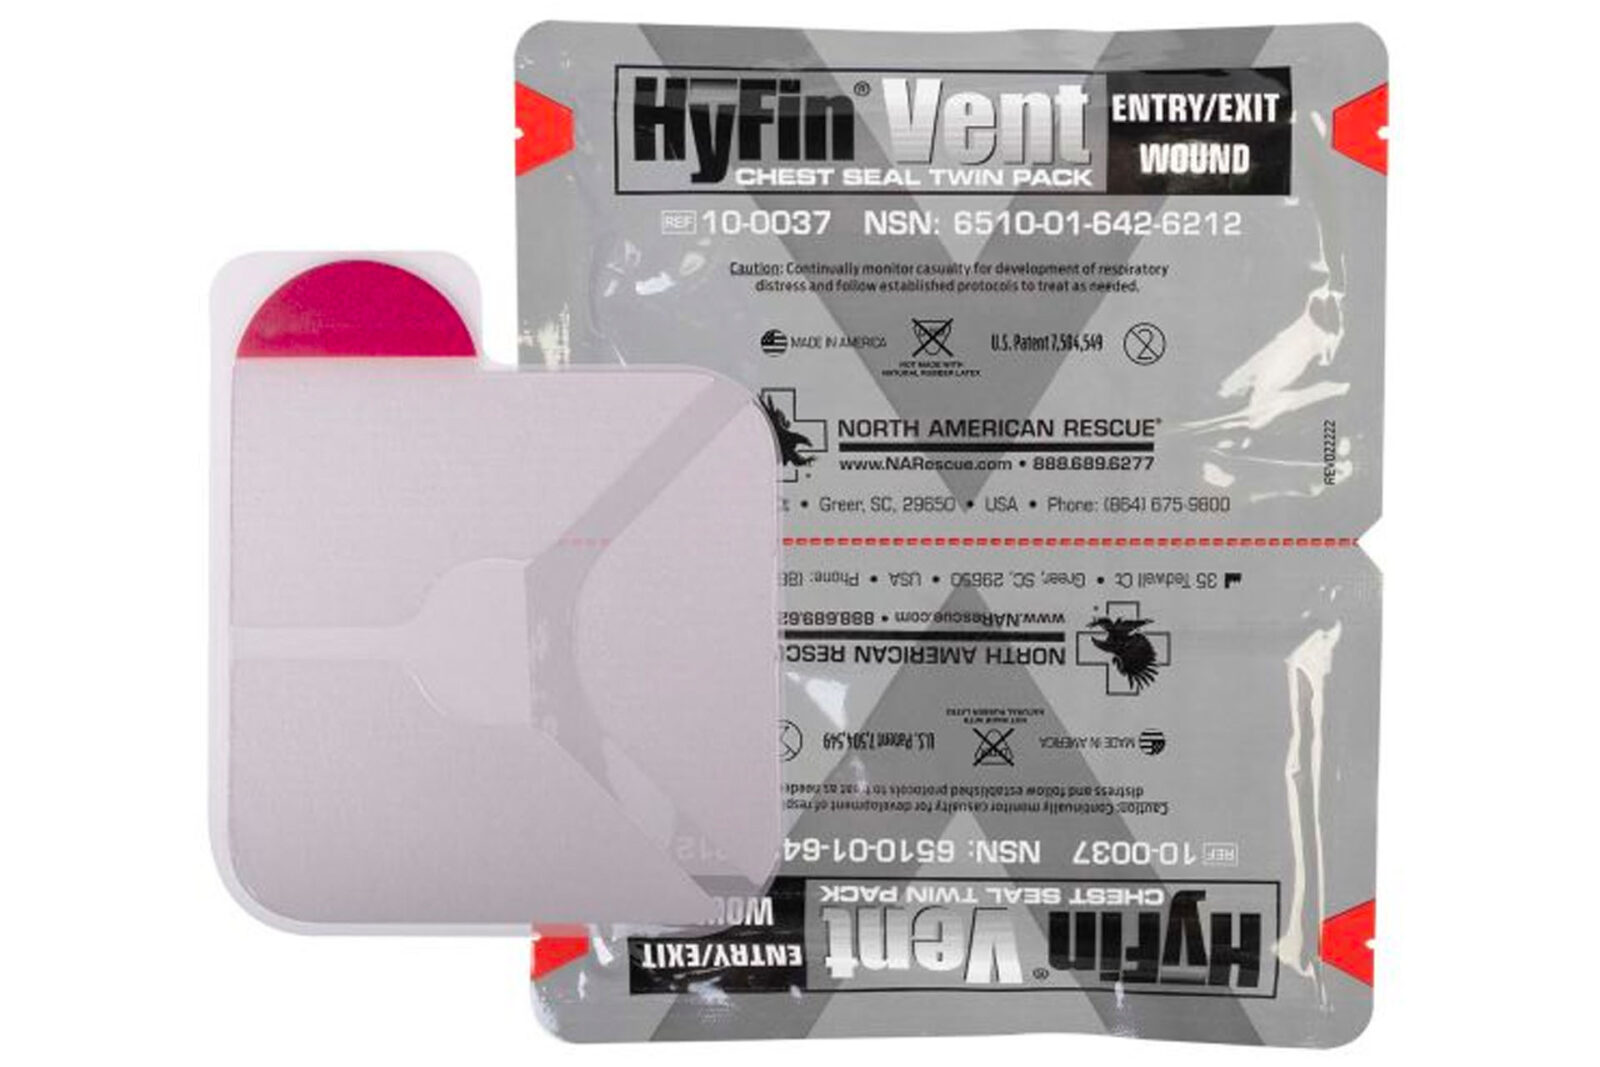 HyFin Vent chest seal in package